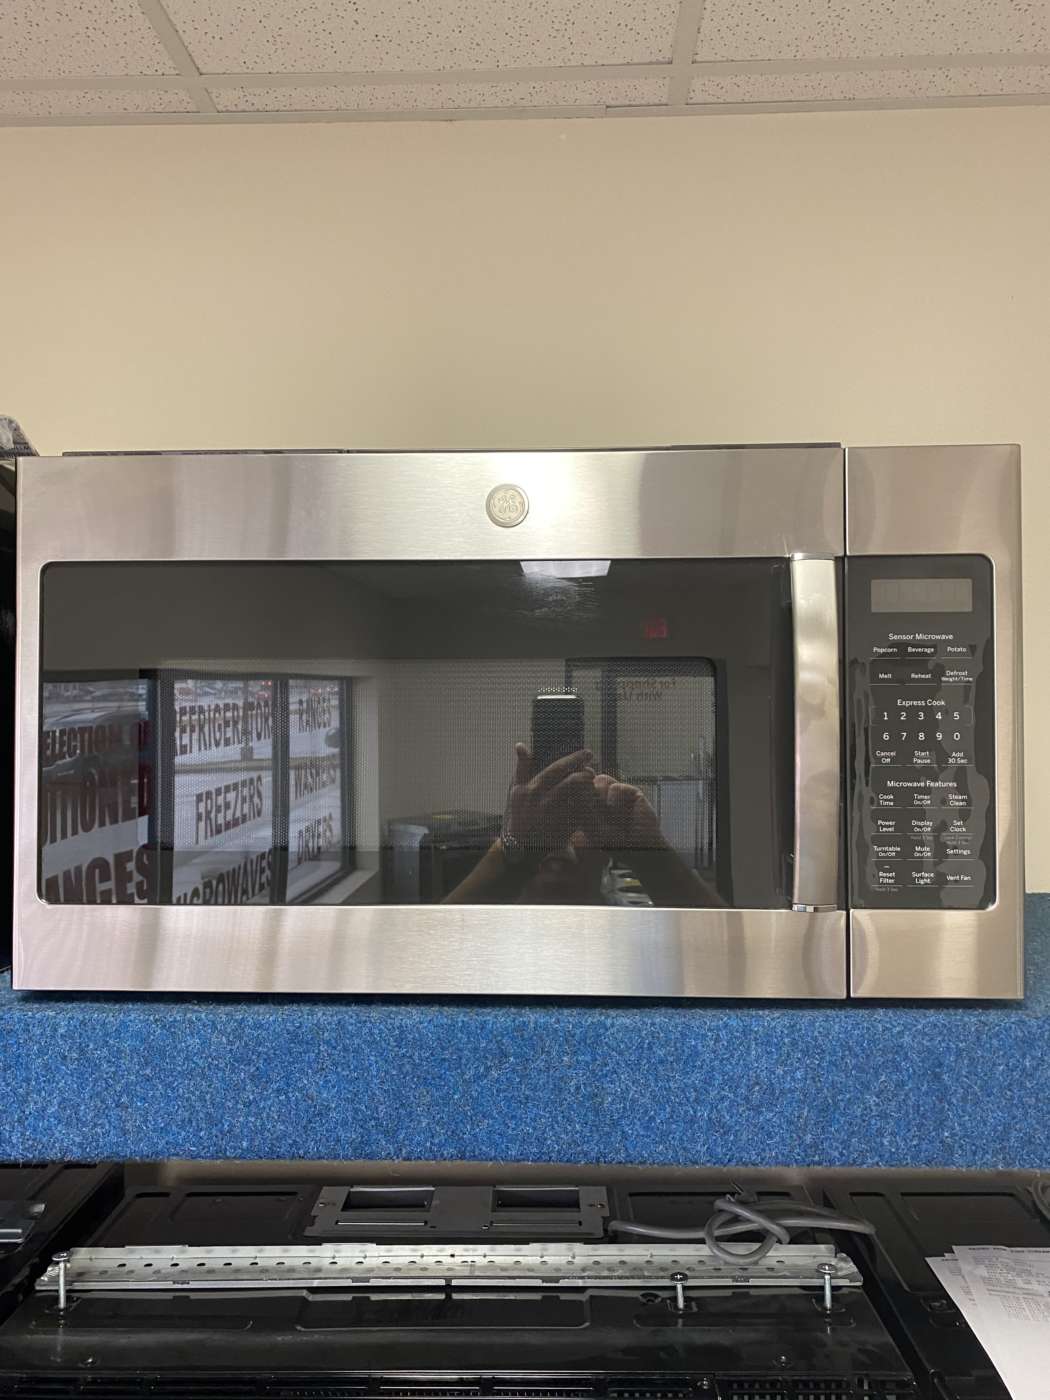 Reconditioned G/E 1.9 Cu. Ft. 1000 Watt OTR Microwave – Stainless